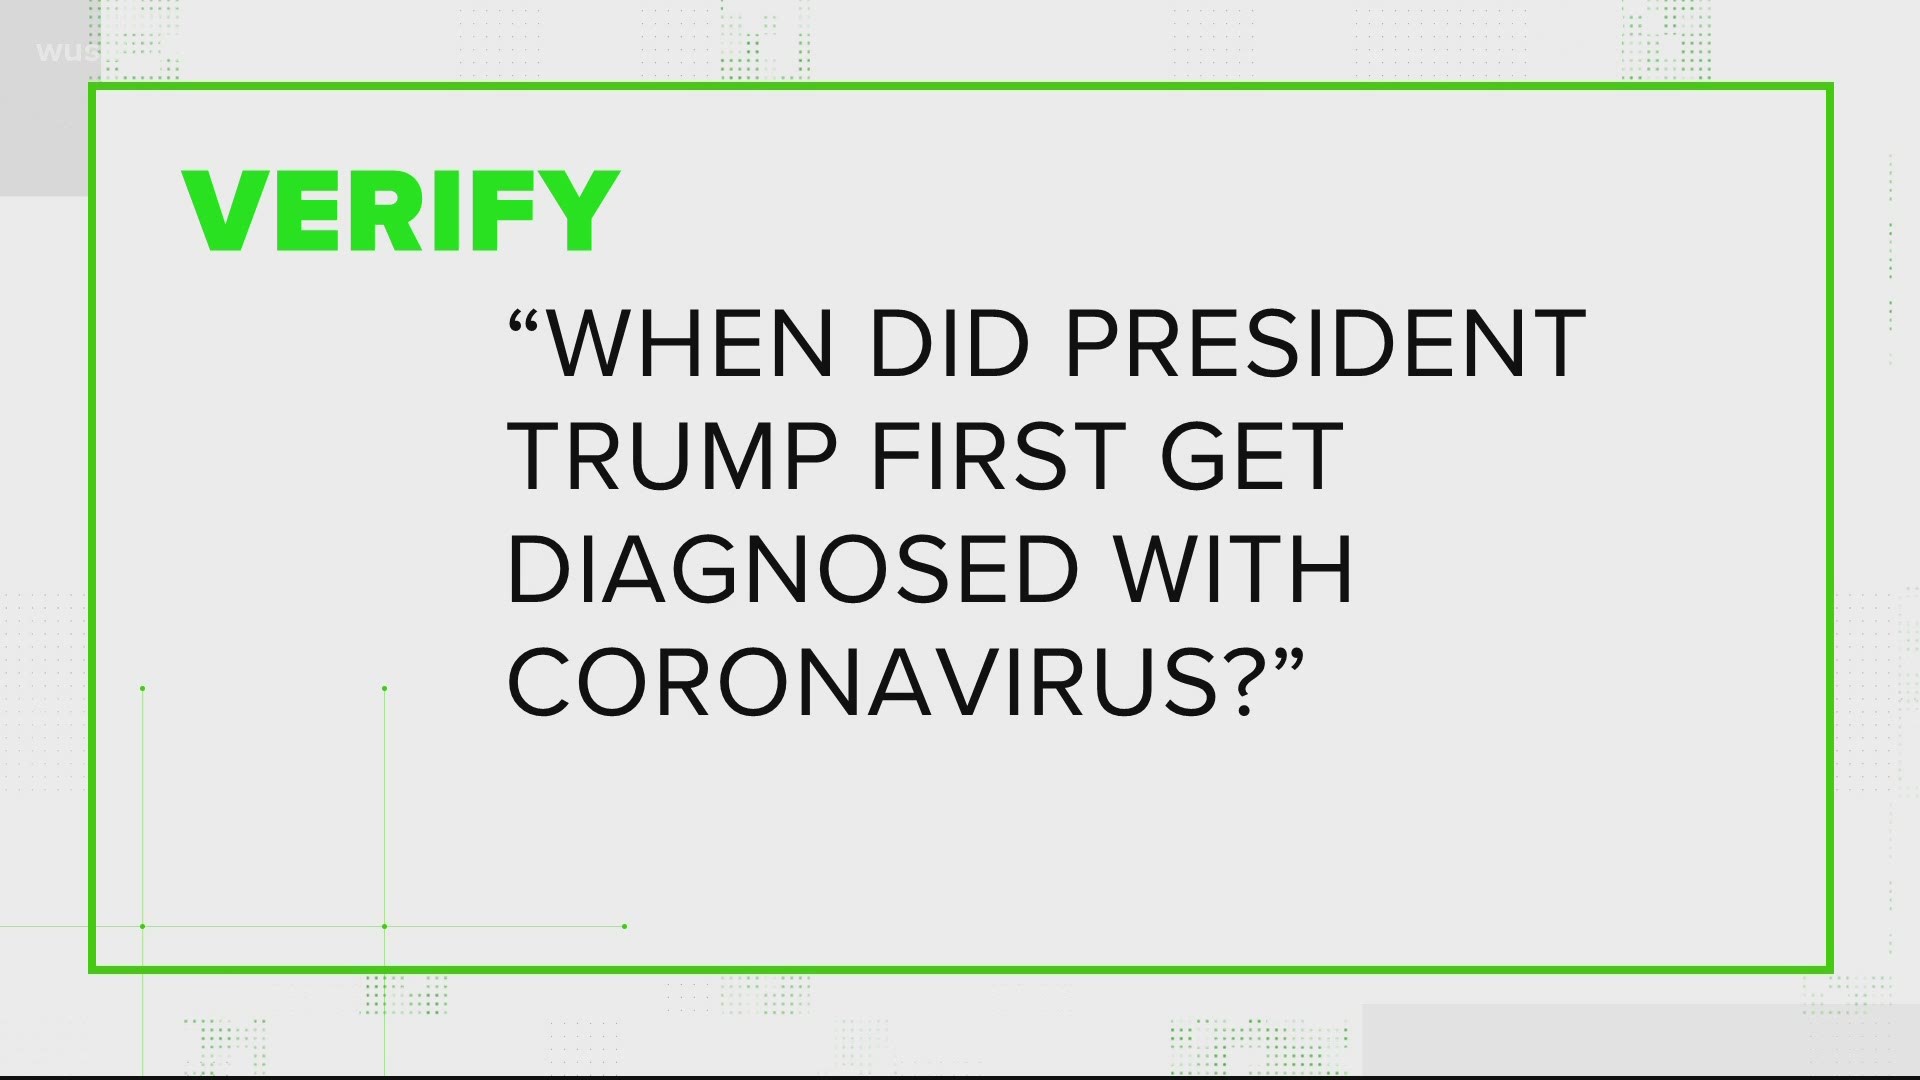 Questions surfaced over the weekend as to when exactly the president was diagnosed with coronavirus. The Verify team looked into it.